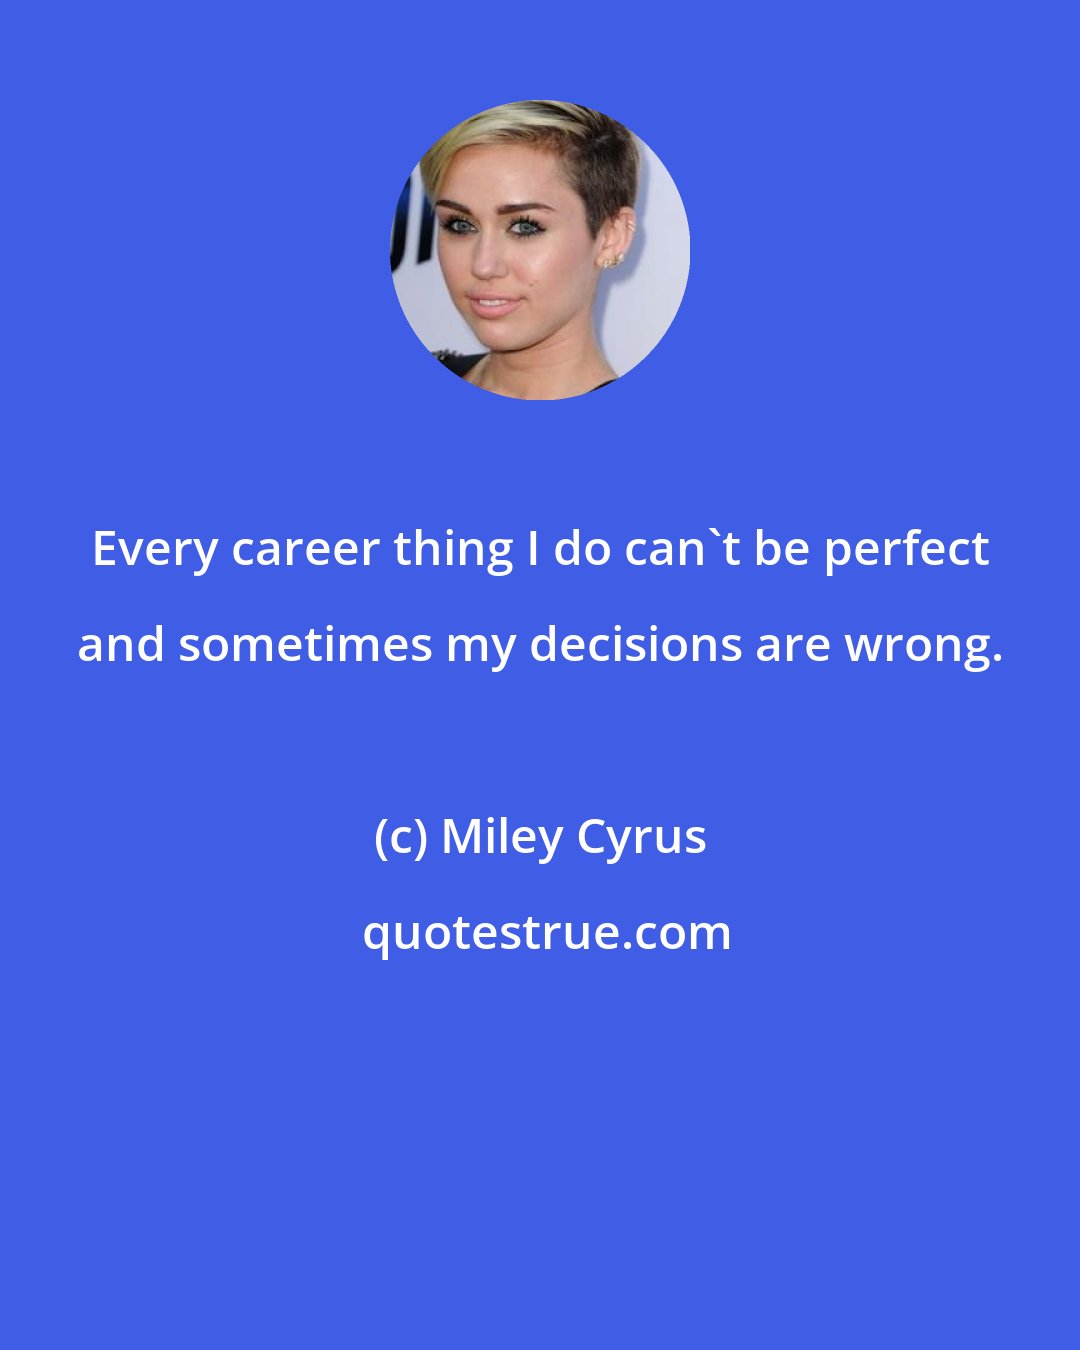 Miley Cyrus: Every career thing I do can't be perfect and sometimes my decisions are wrong.